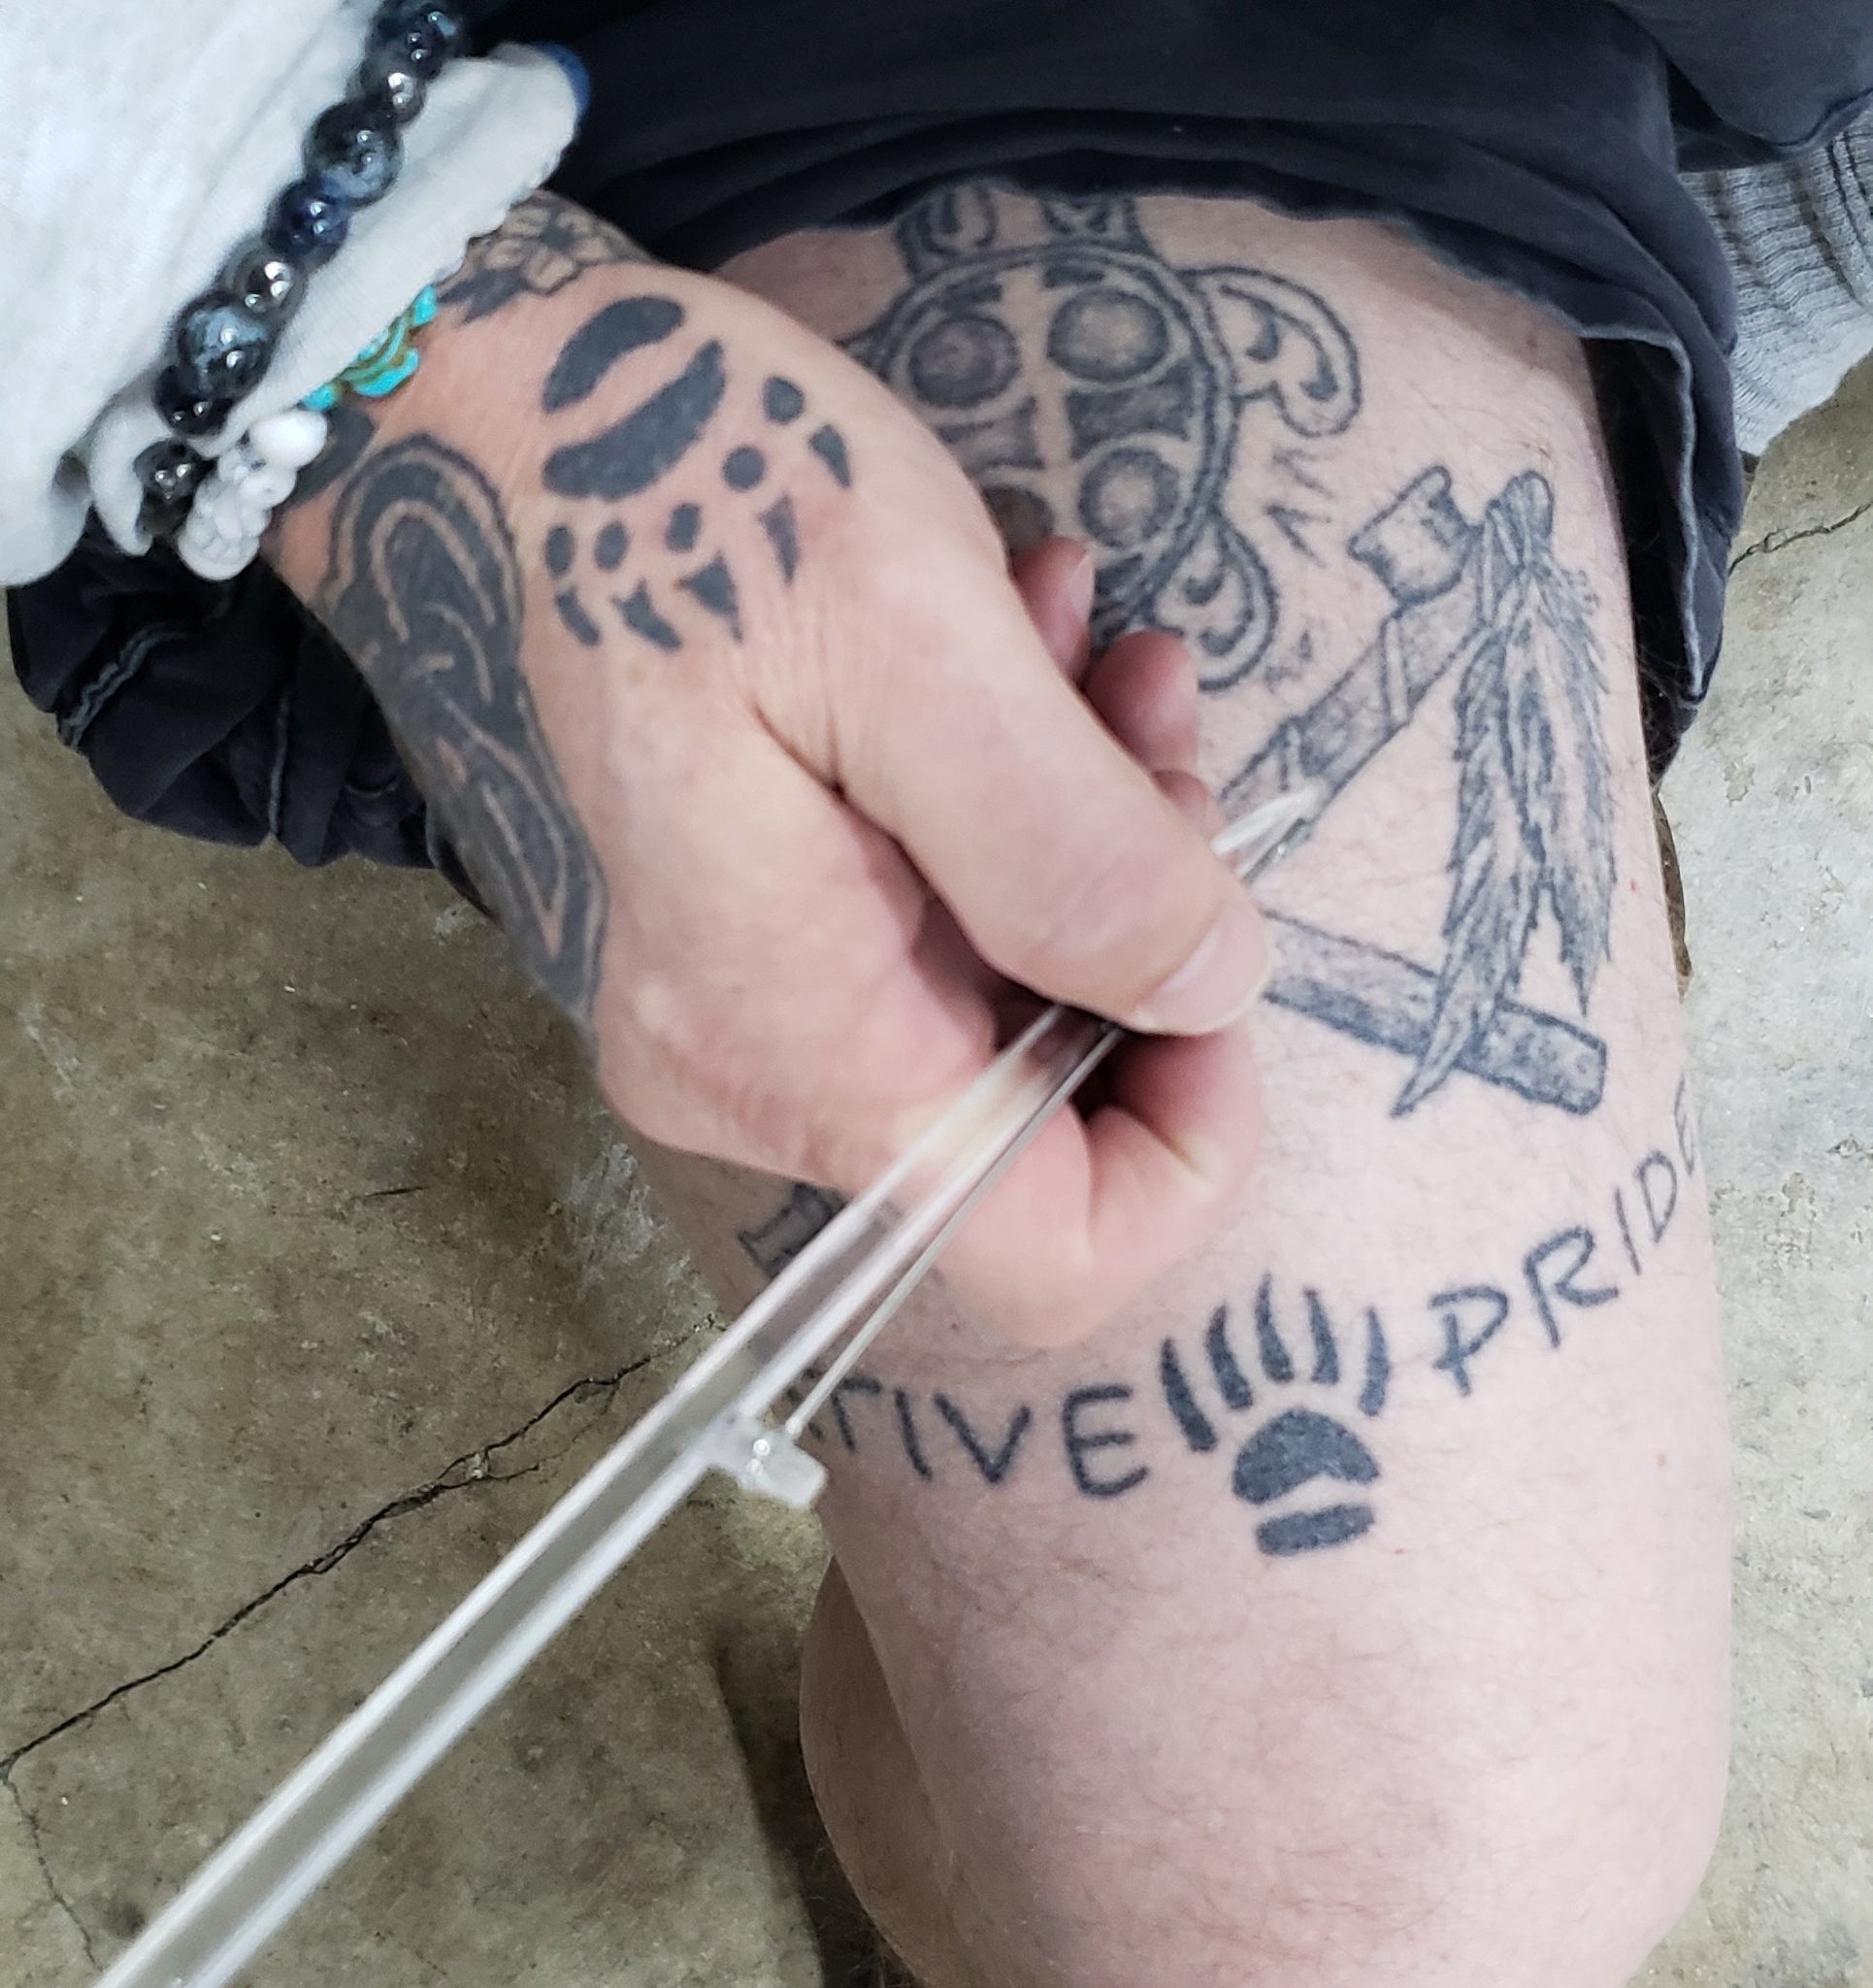 DIY Stick and Poke Tattoos Are Trending in 2020 Experts Weigh In